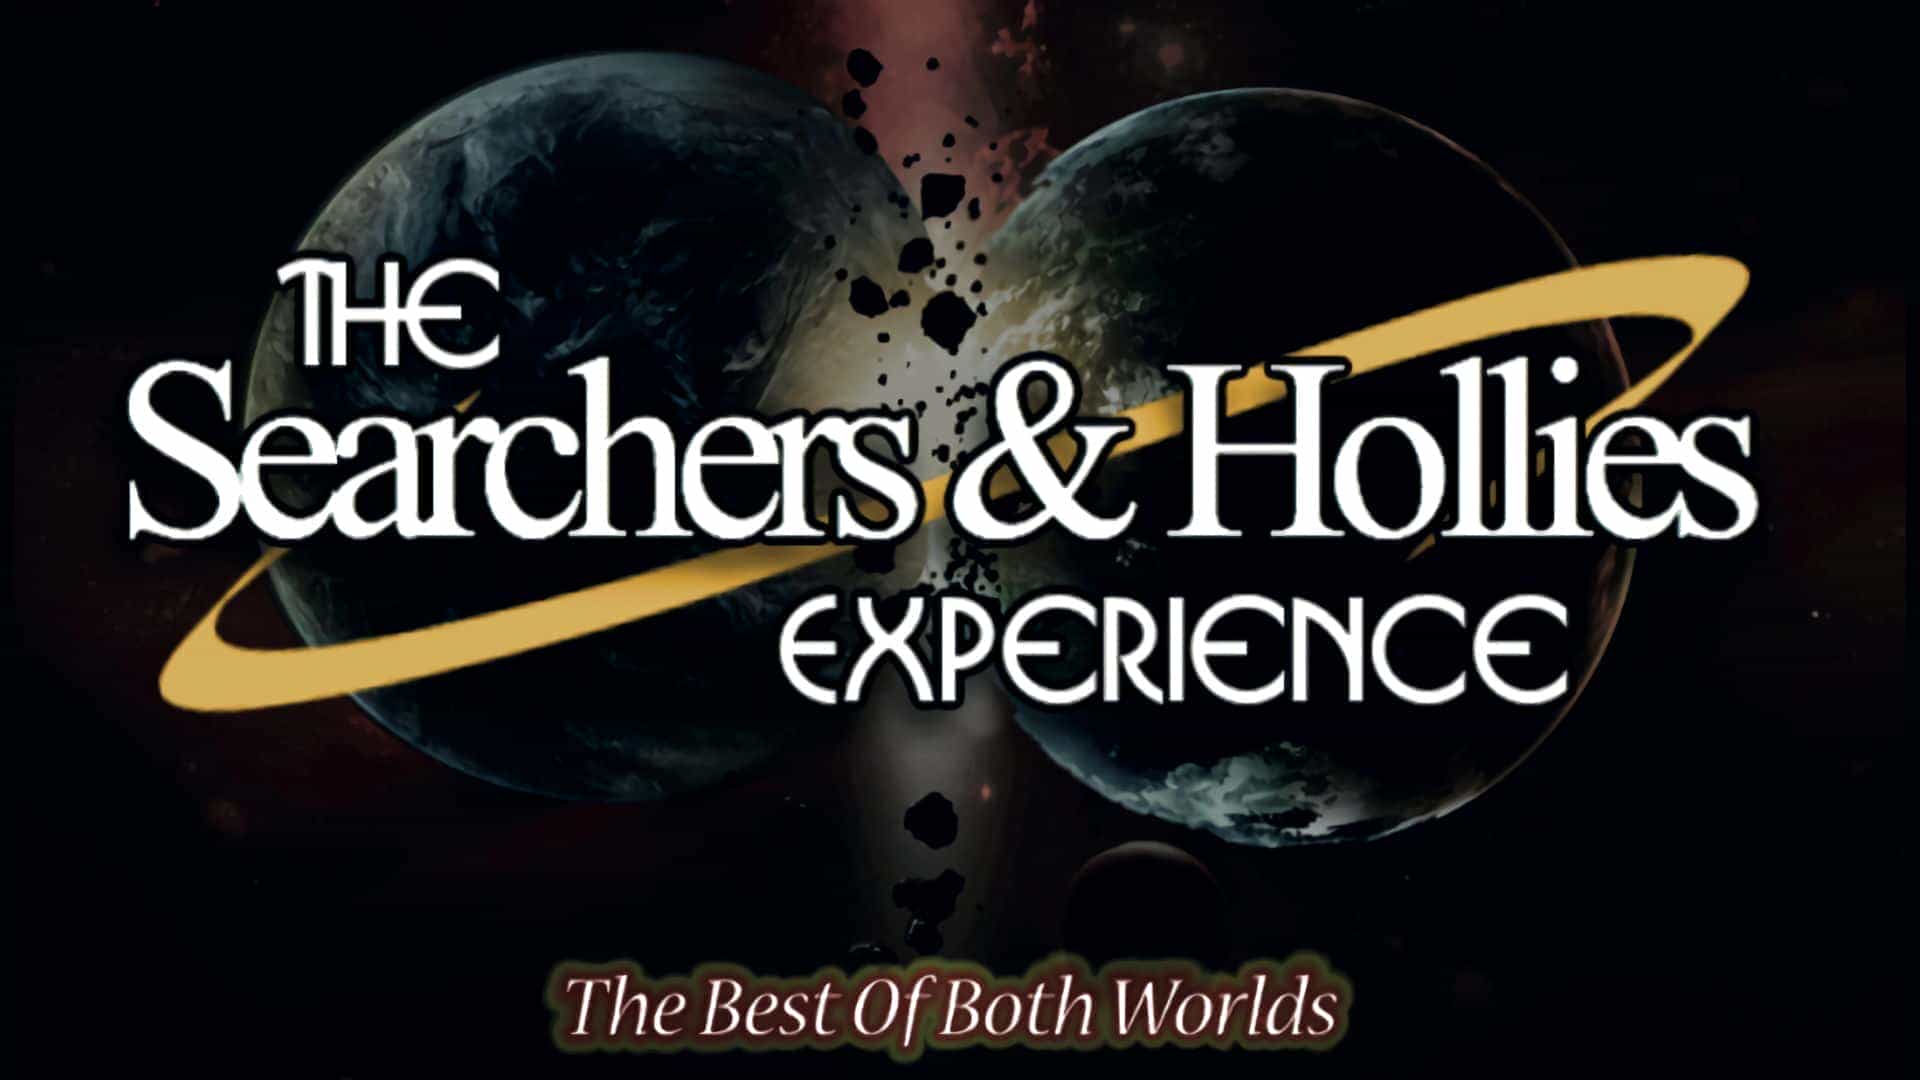 The Searchers & Hollies Experience